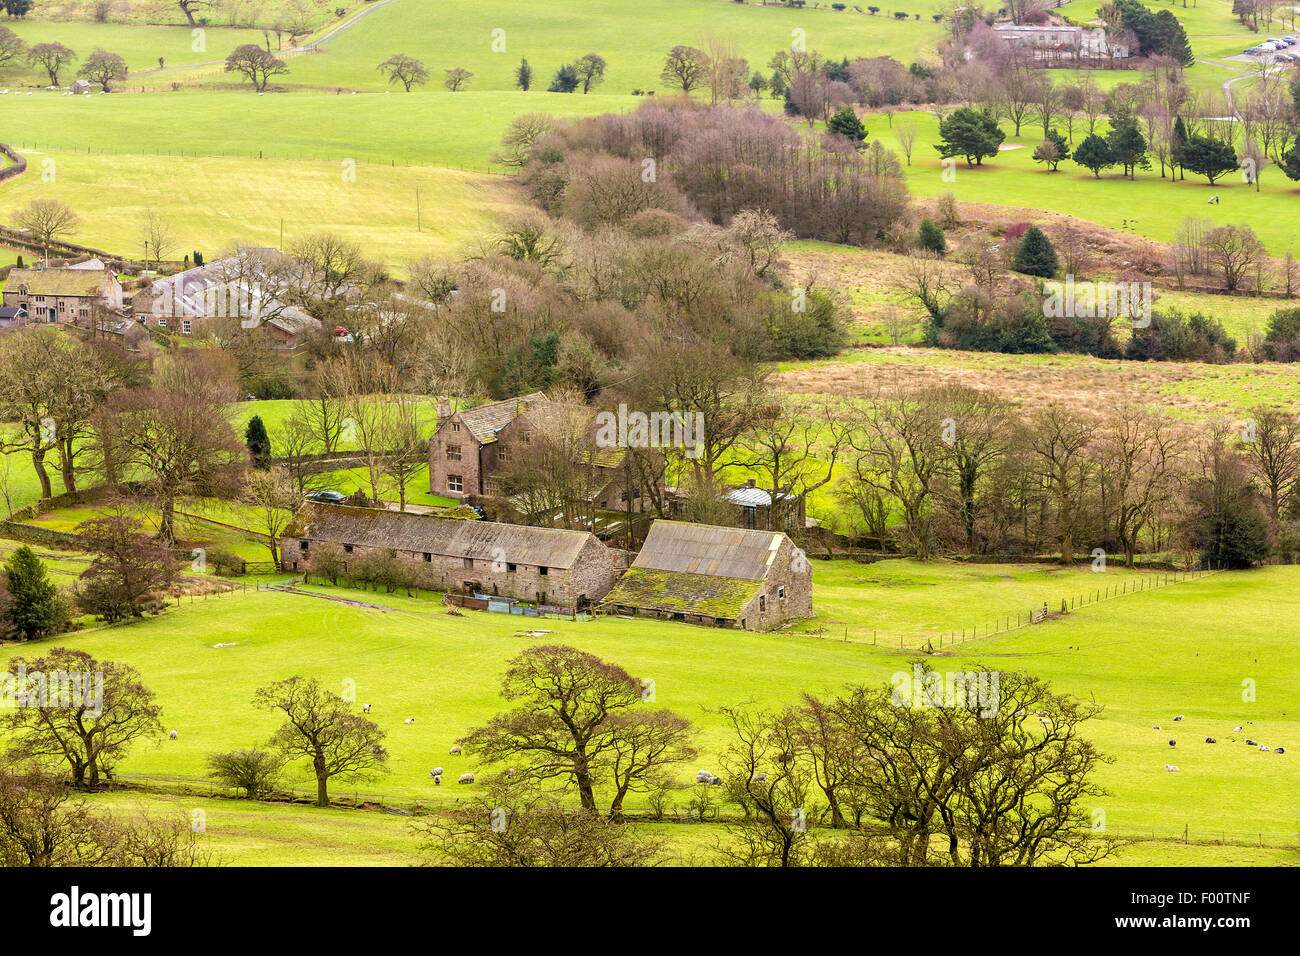 View from Eccles Pike, Chapel-en-le-Frith, Derbyshire, England, United Kingdom, Europe. Stock Photo